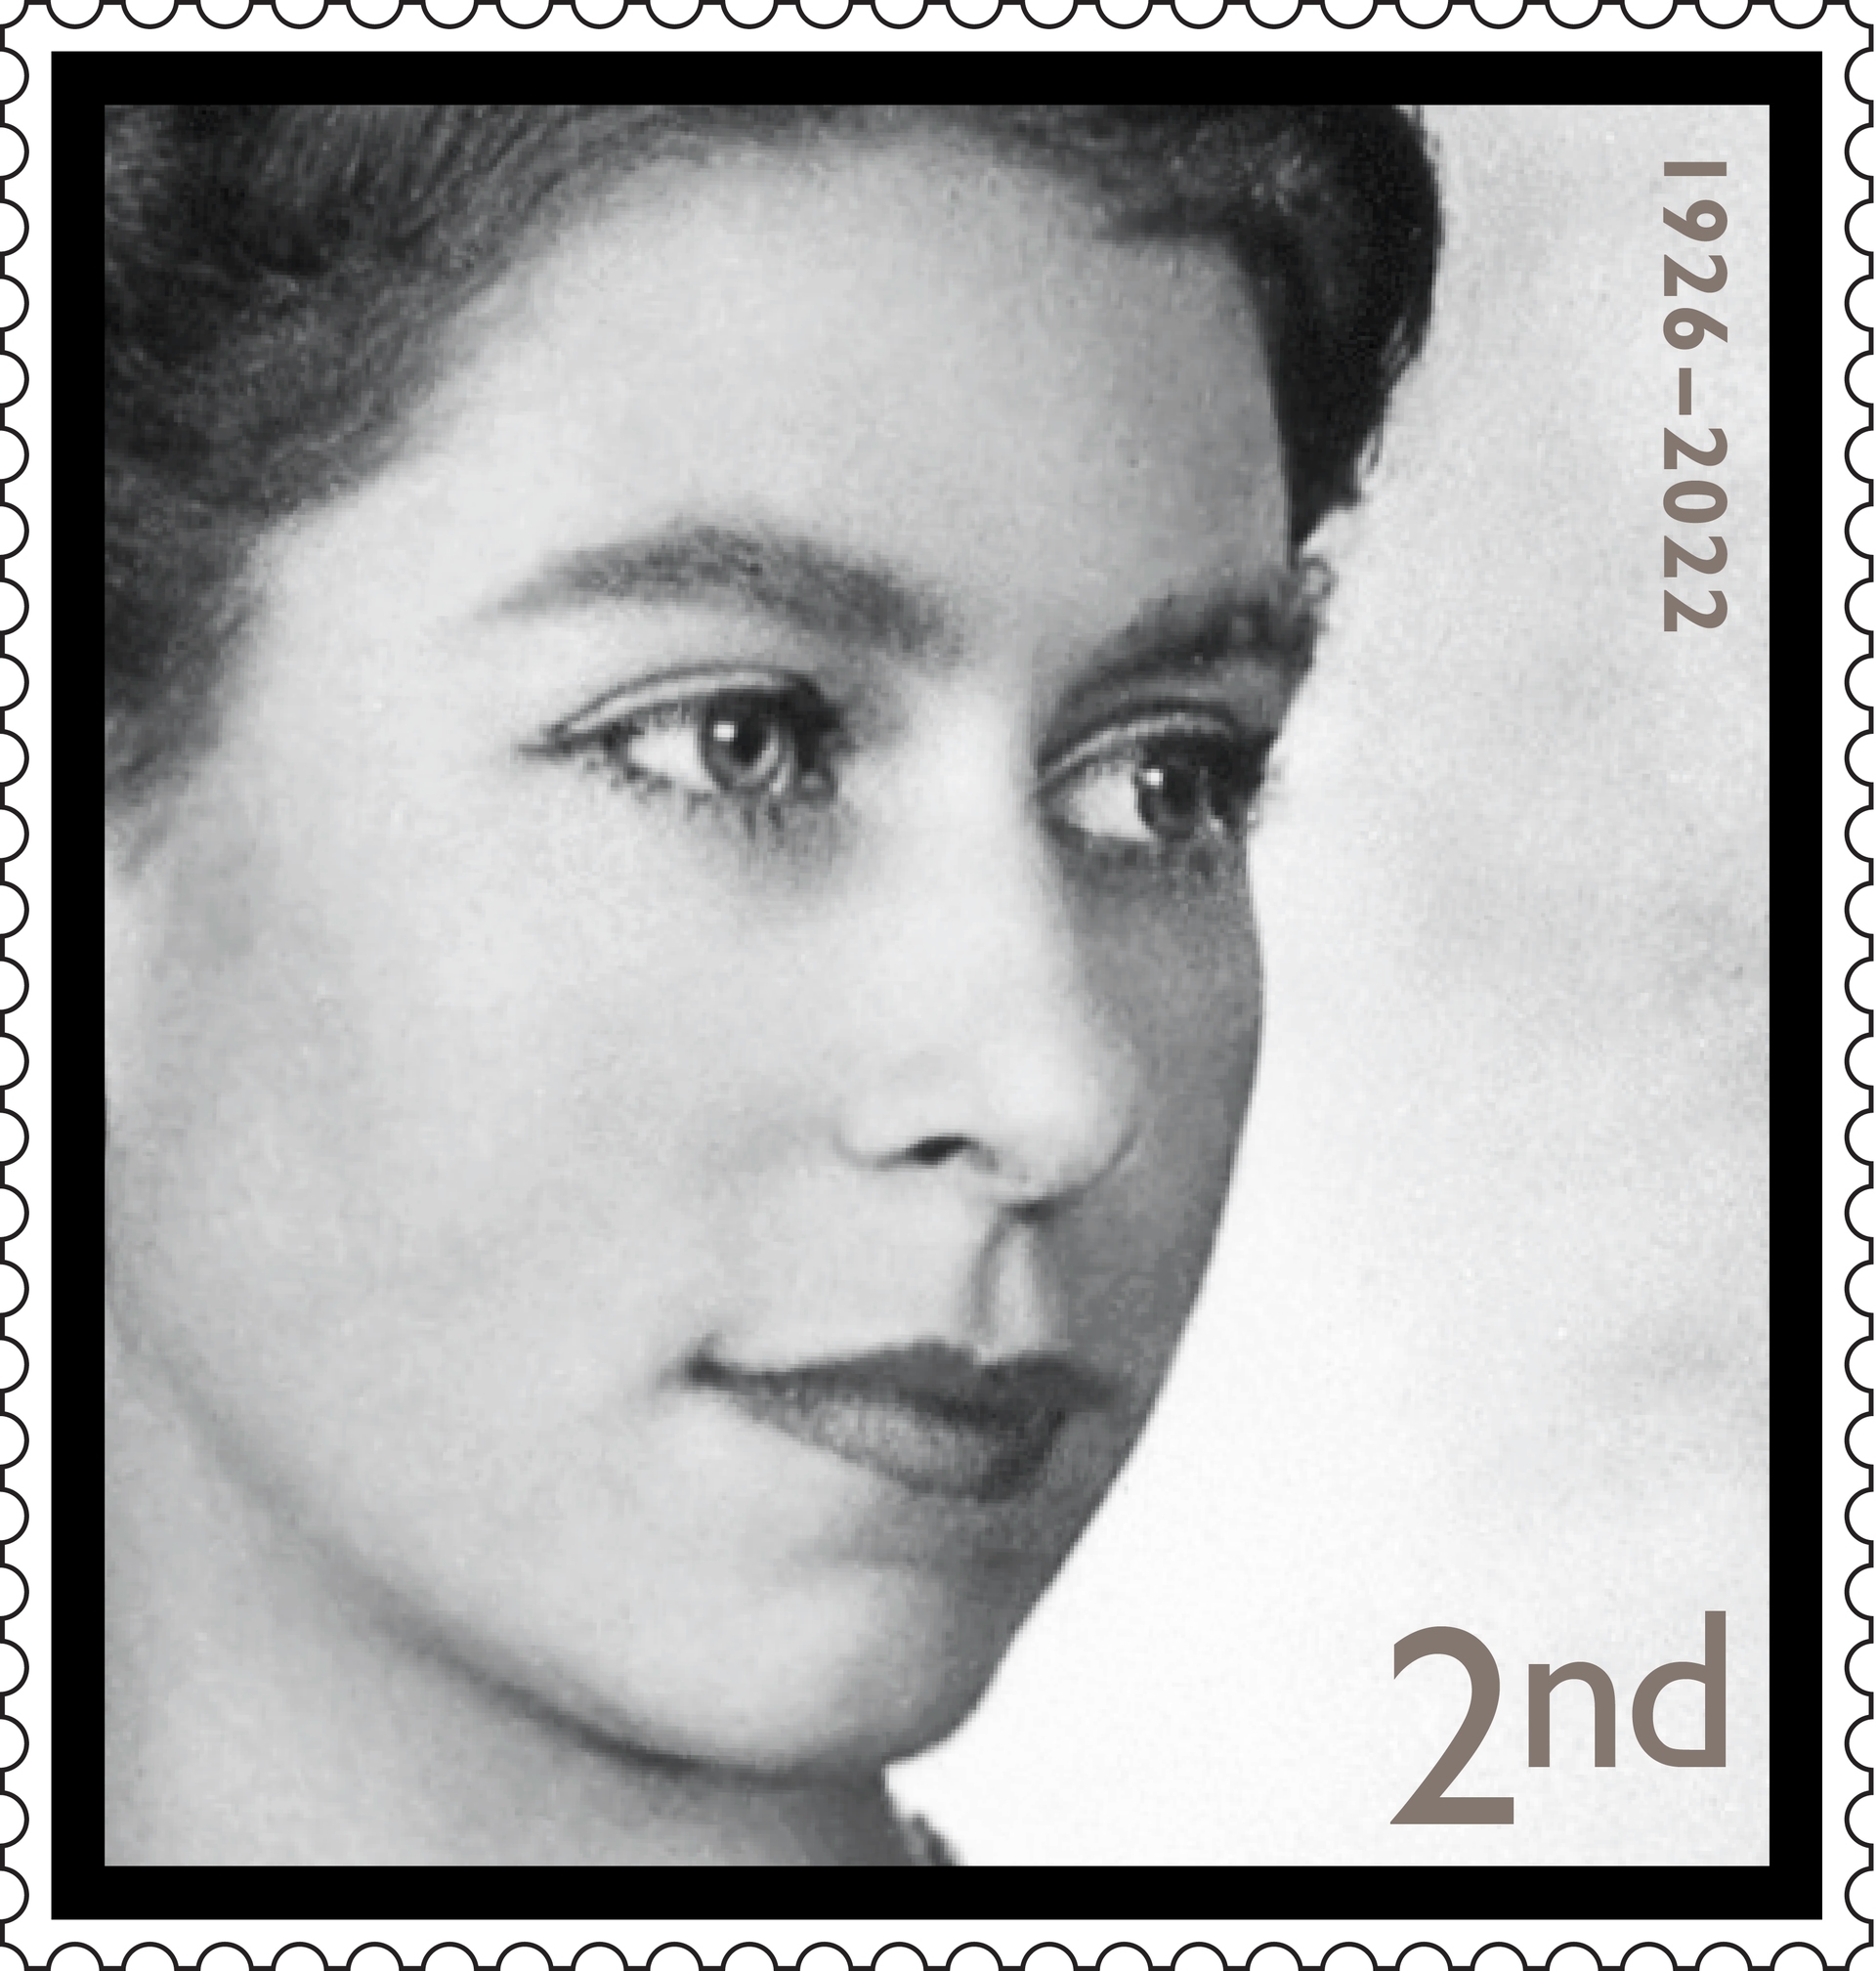 A photograph taken to mark the Queen’s accession and coronation will feature on second-class stamps.